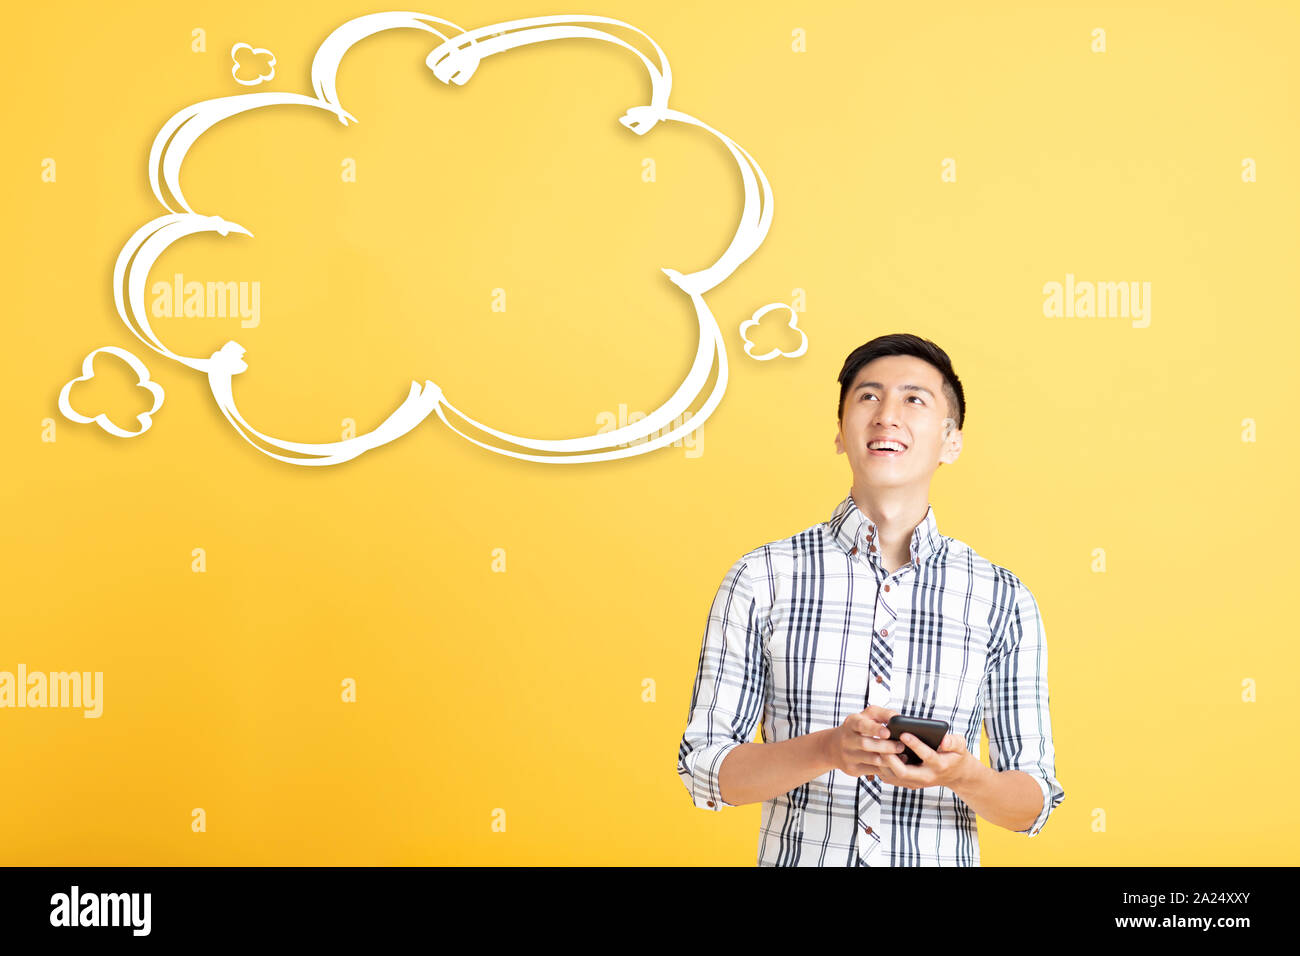 smiling young man with thinking bubble cloud concept Stock Photo